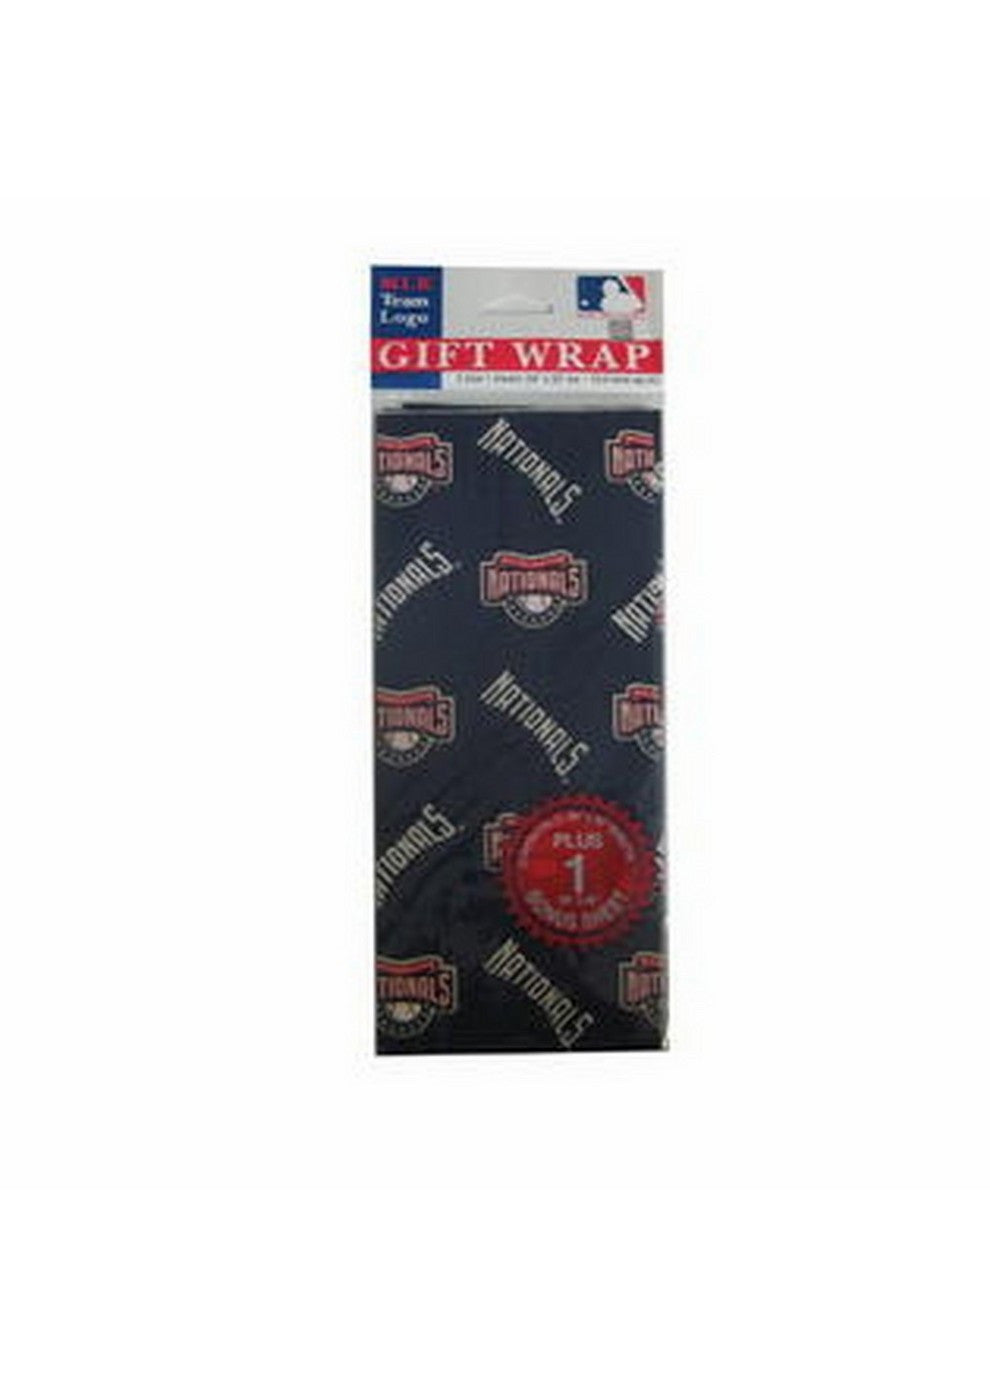 2-packages Of Mlb Gift Wrap - Nationals